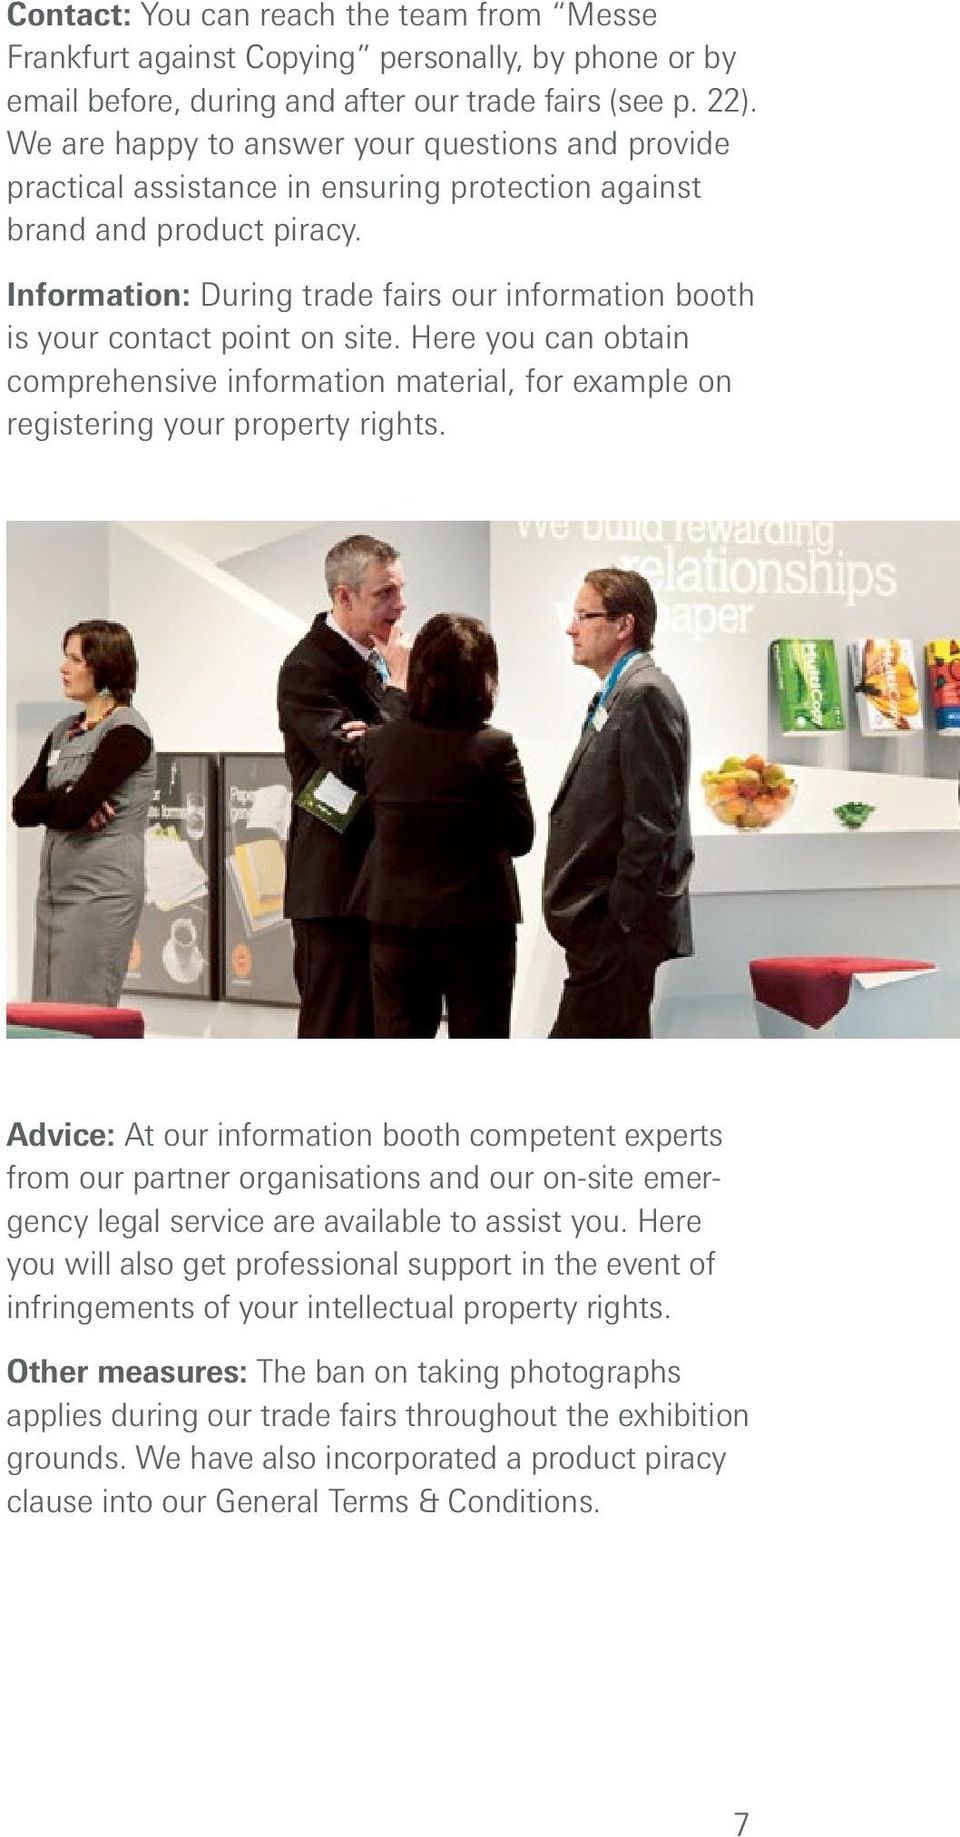 Information: During trade fairs our information booth is your contact point on site. Here you can obtain comprehensive information material, for example on registering your property rights.